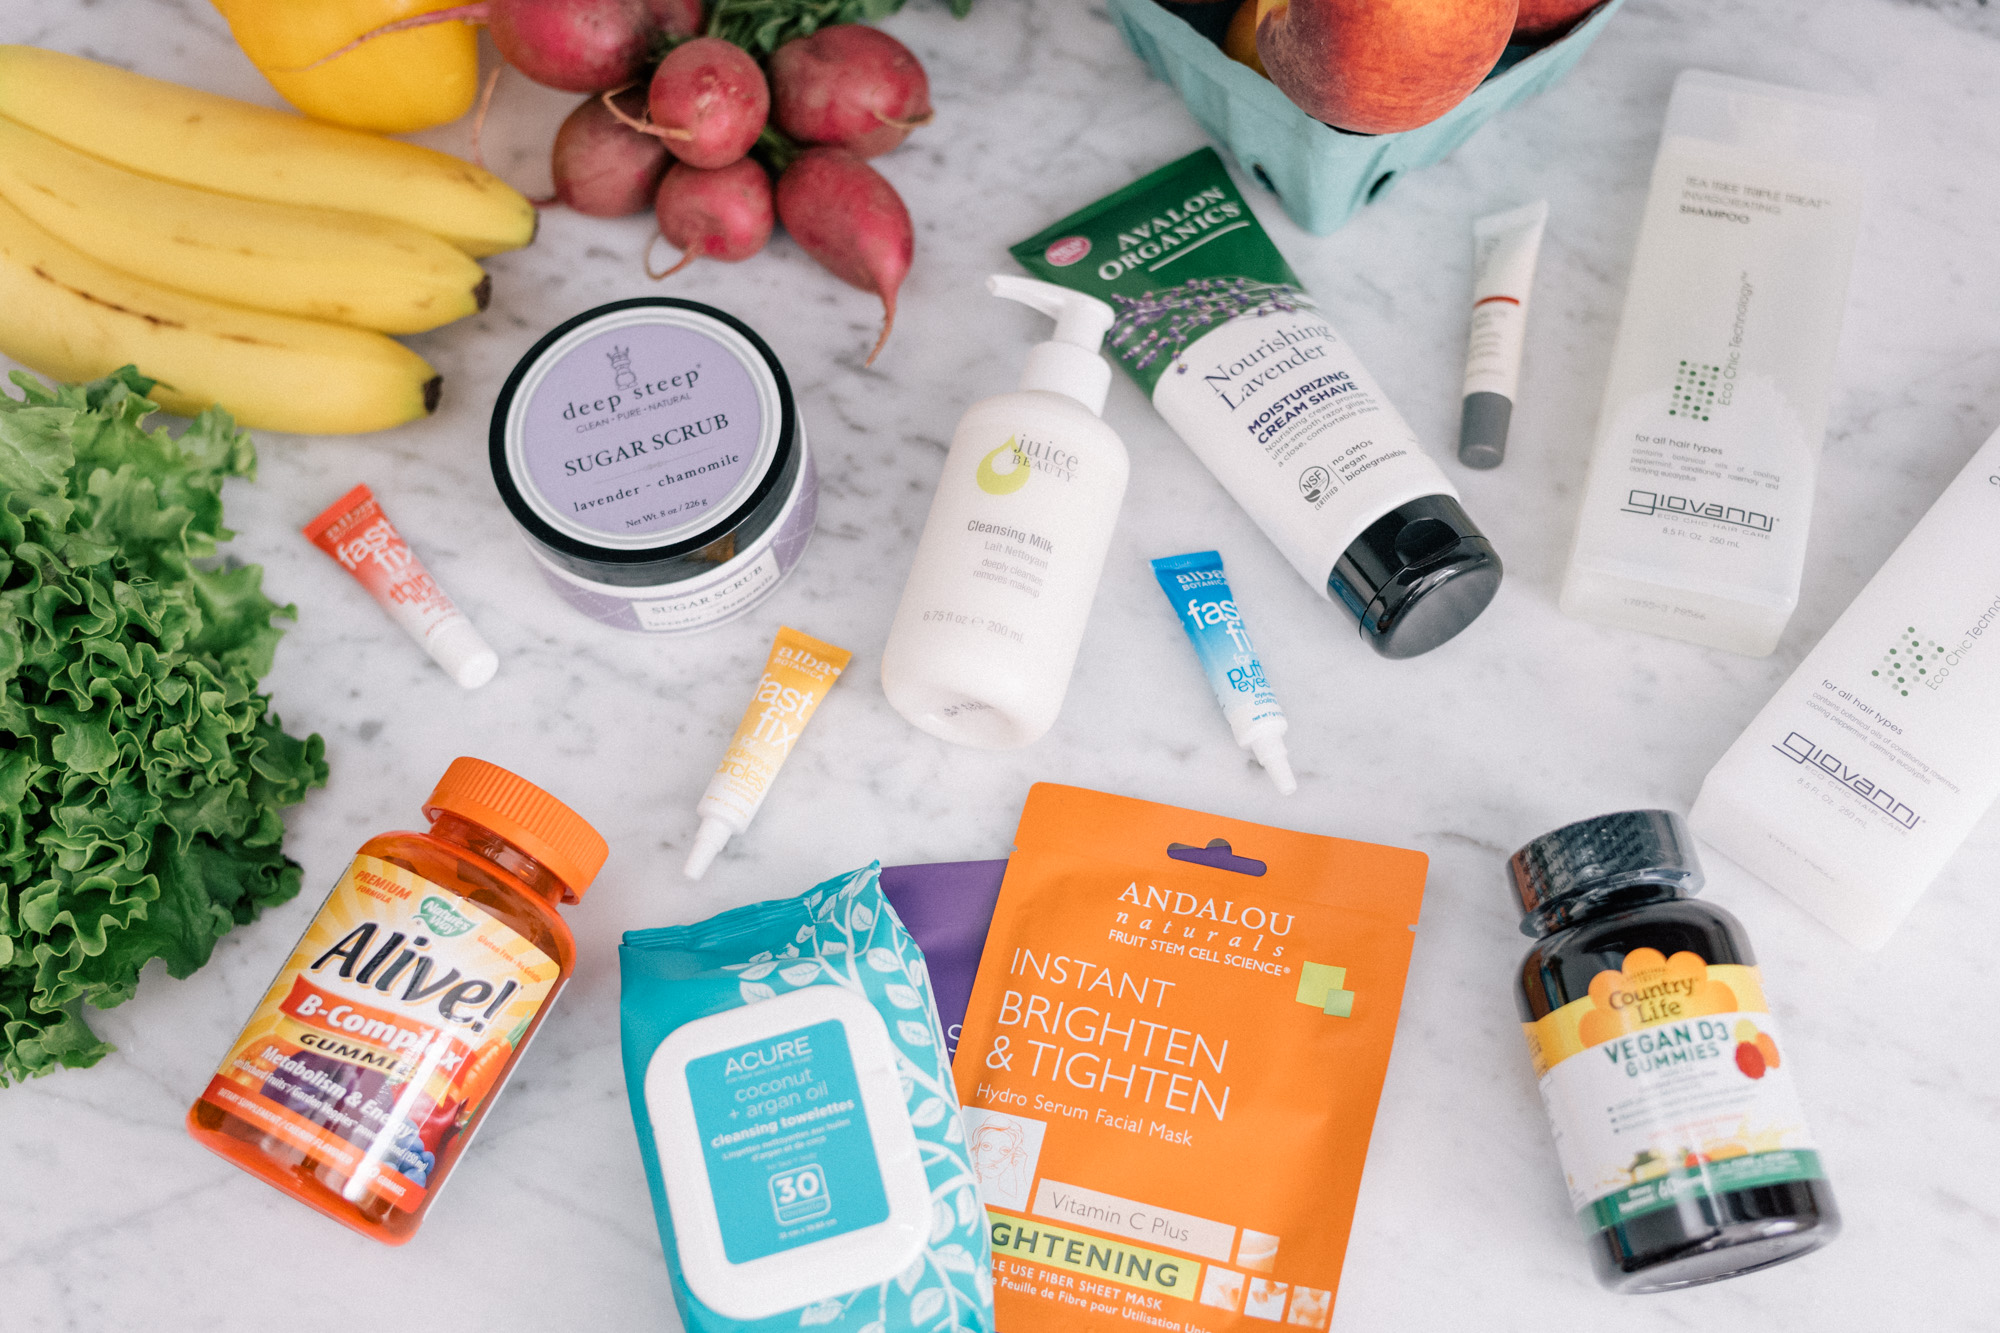 These Are The 10 Beauty Products I Buy From Whole Foods - Julia Berolzheimer